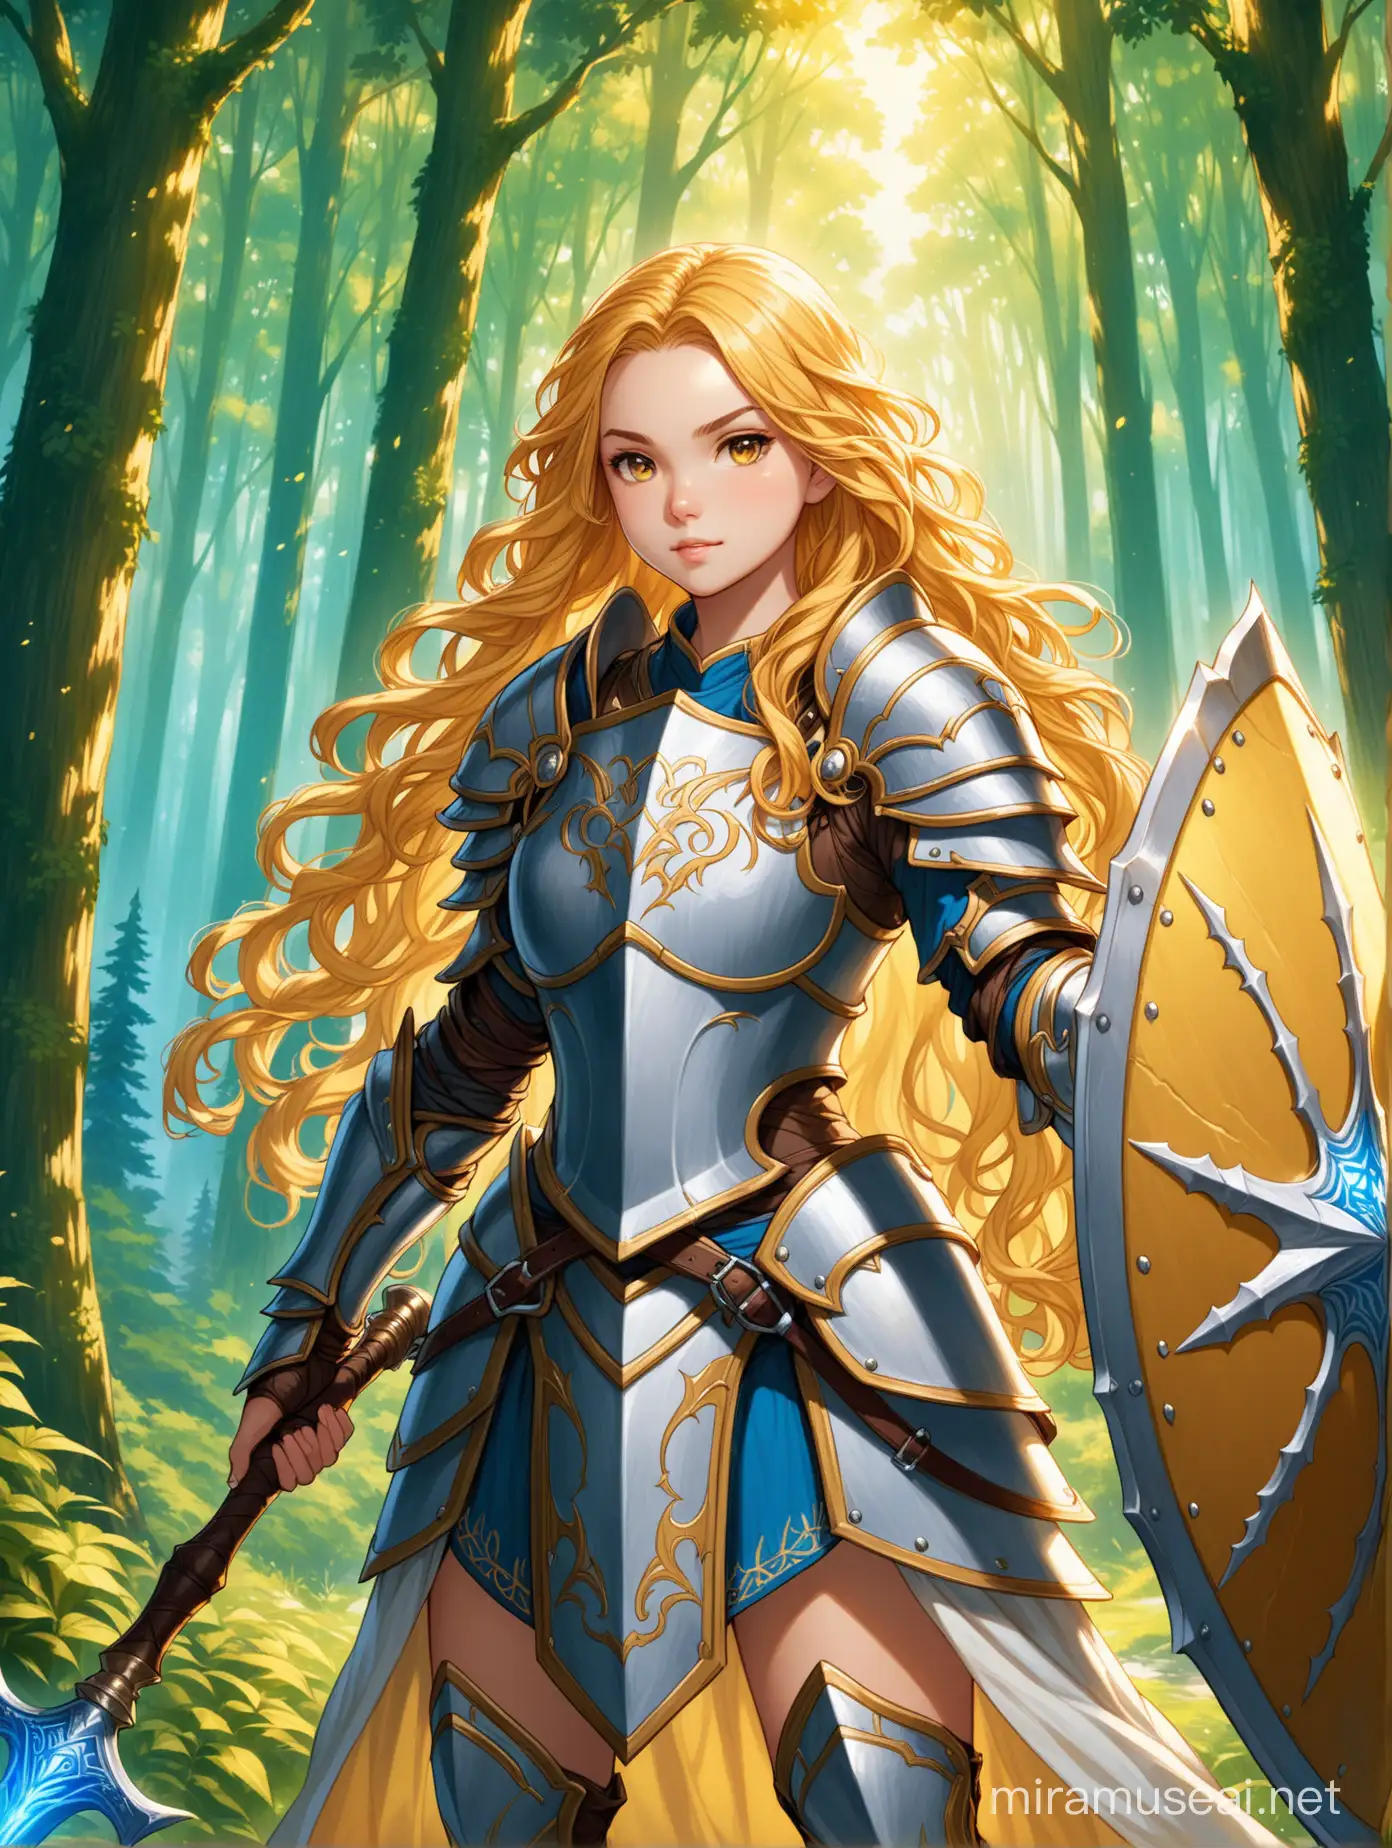 Female Paladin with Shield and Mace in Fantasy Forest